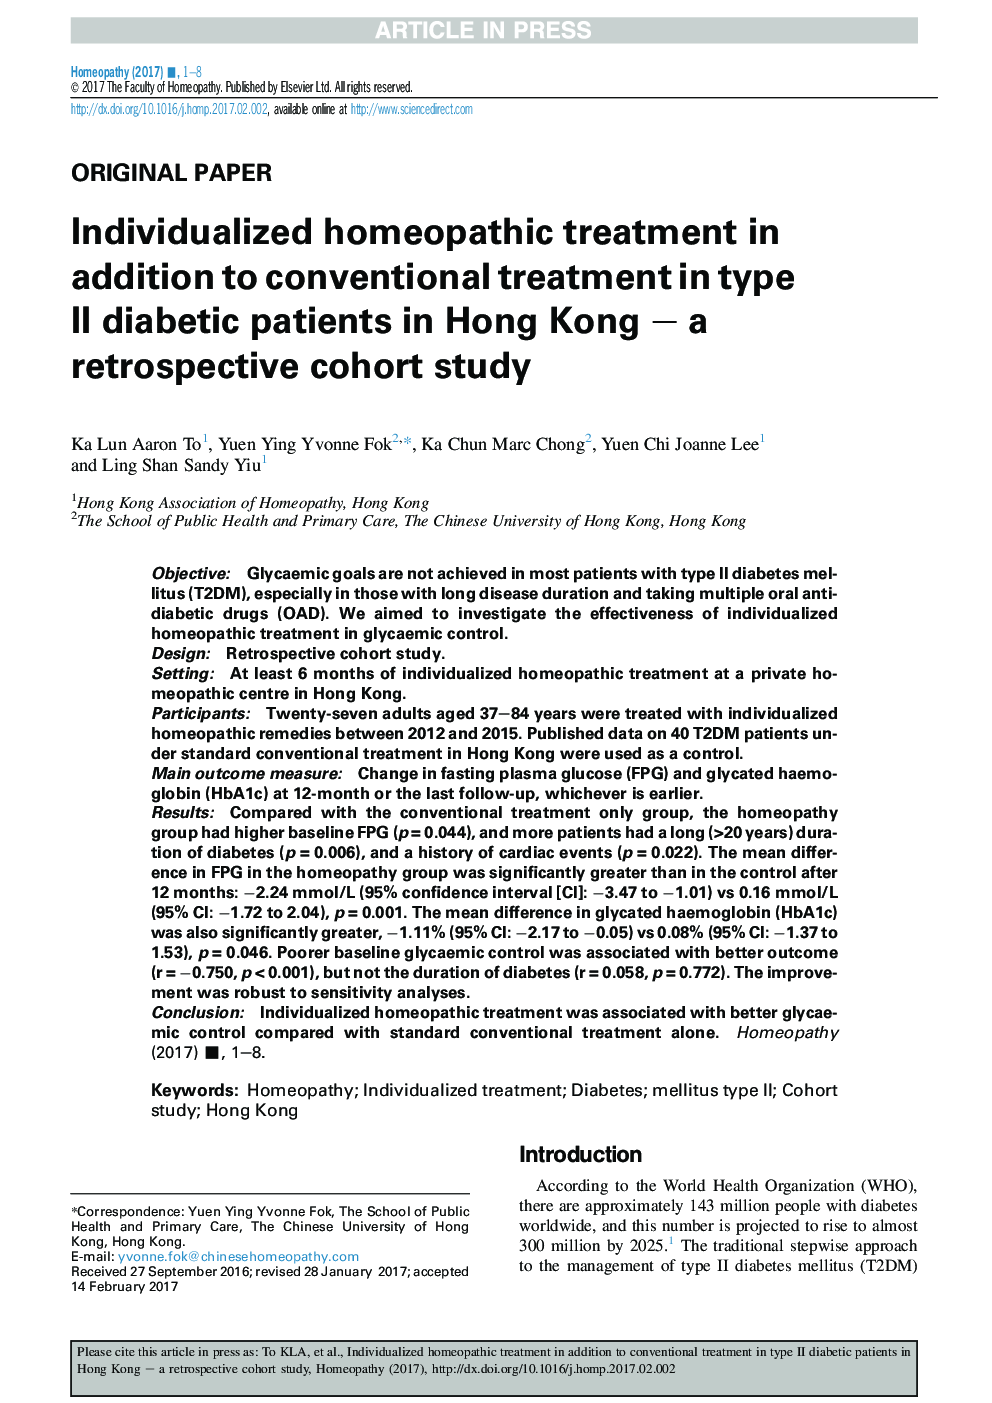 Individualized homeopathic treatment in addition to conventional treatment in type II diabetic patients in Hong Kong - a retrospective cohort study